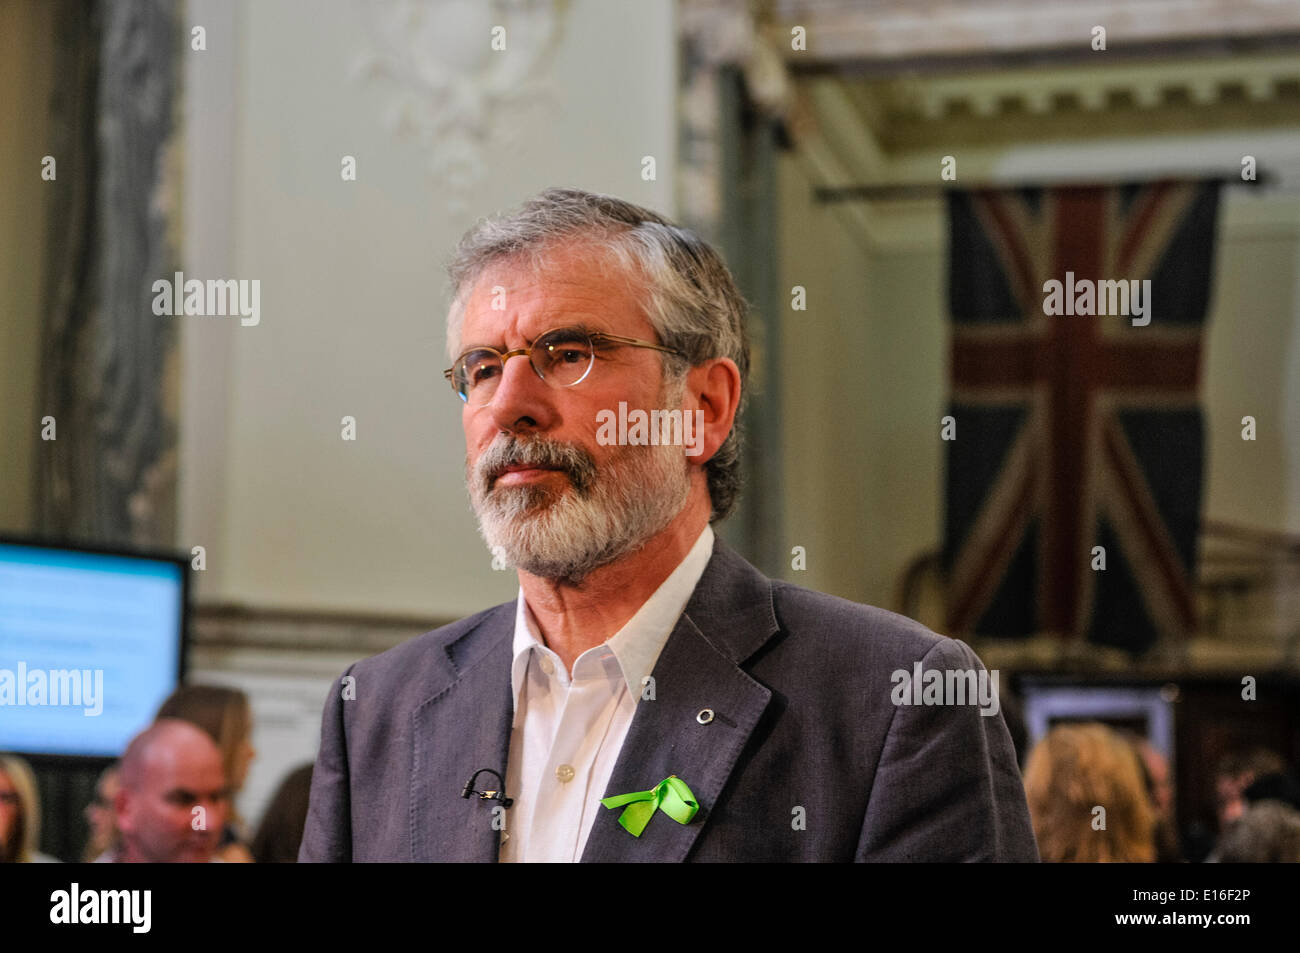 Belfast, Northern Ireland. 24 May 2014 - Sinn Fein President, Gerry Adams (TD for Louth), is interviewed by UTV at Belfast City Hall during the count of the Local Government vote for Belfast City Council. Credit:  Stephen Barnes/Alamy Live News Stock Photo